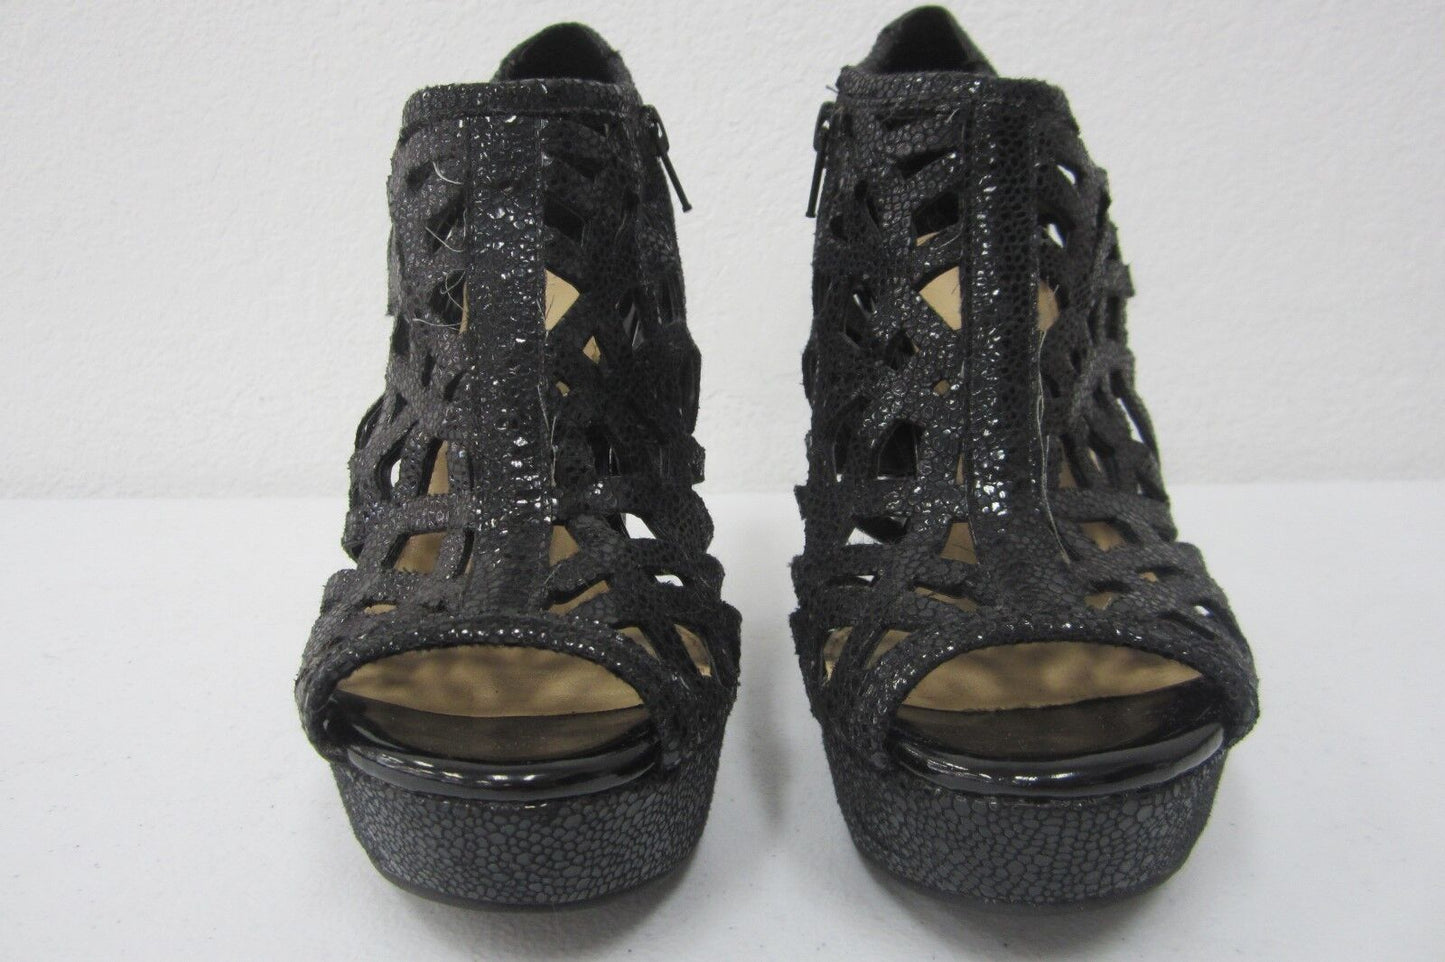 *NEW*  Gianni Bini Zip Up Black Leather Faux Snakeskin Wedge Open Toe Shoes 7M